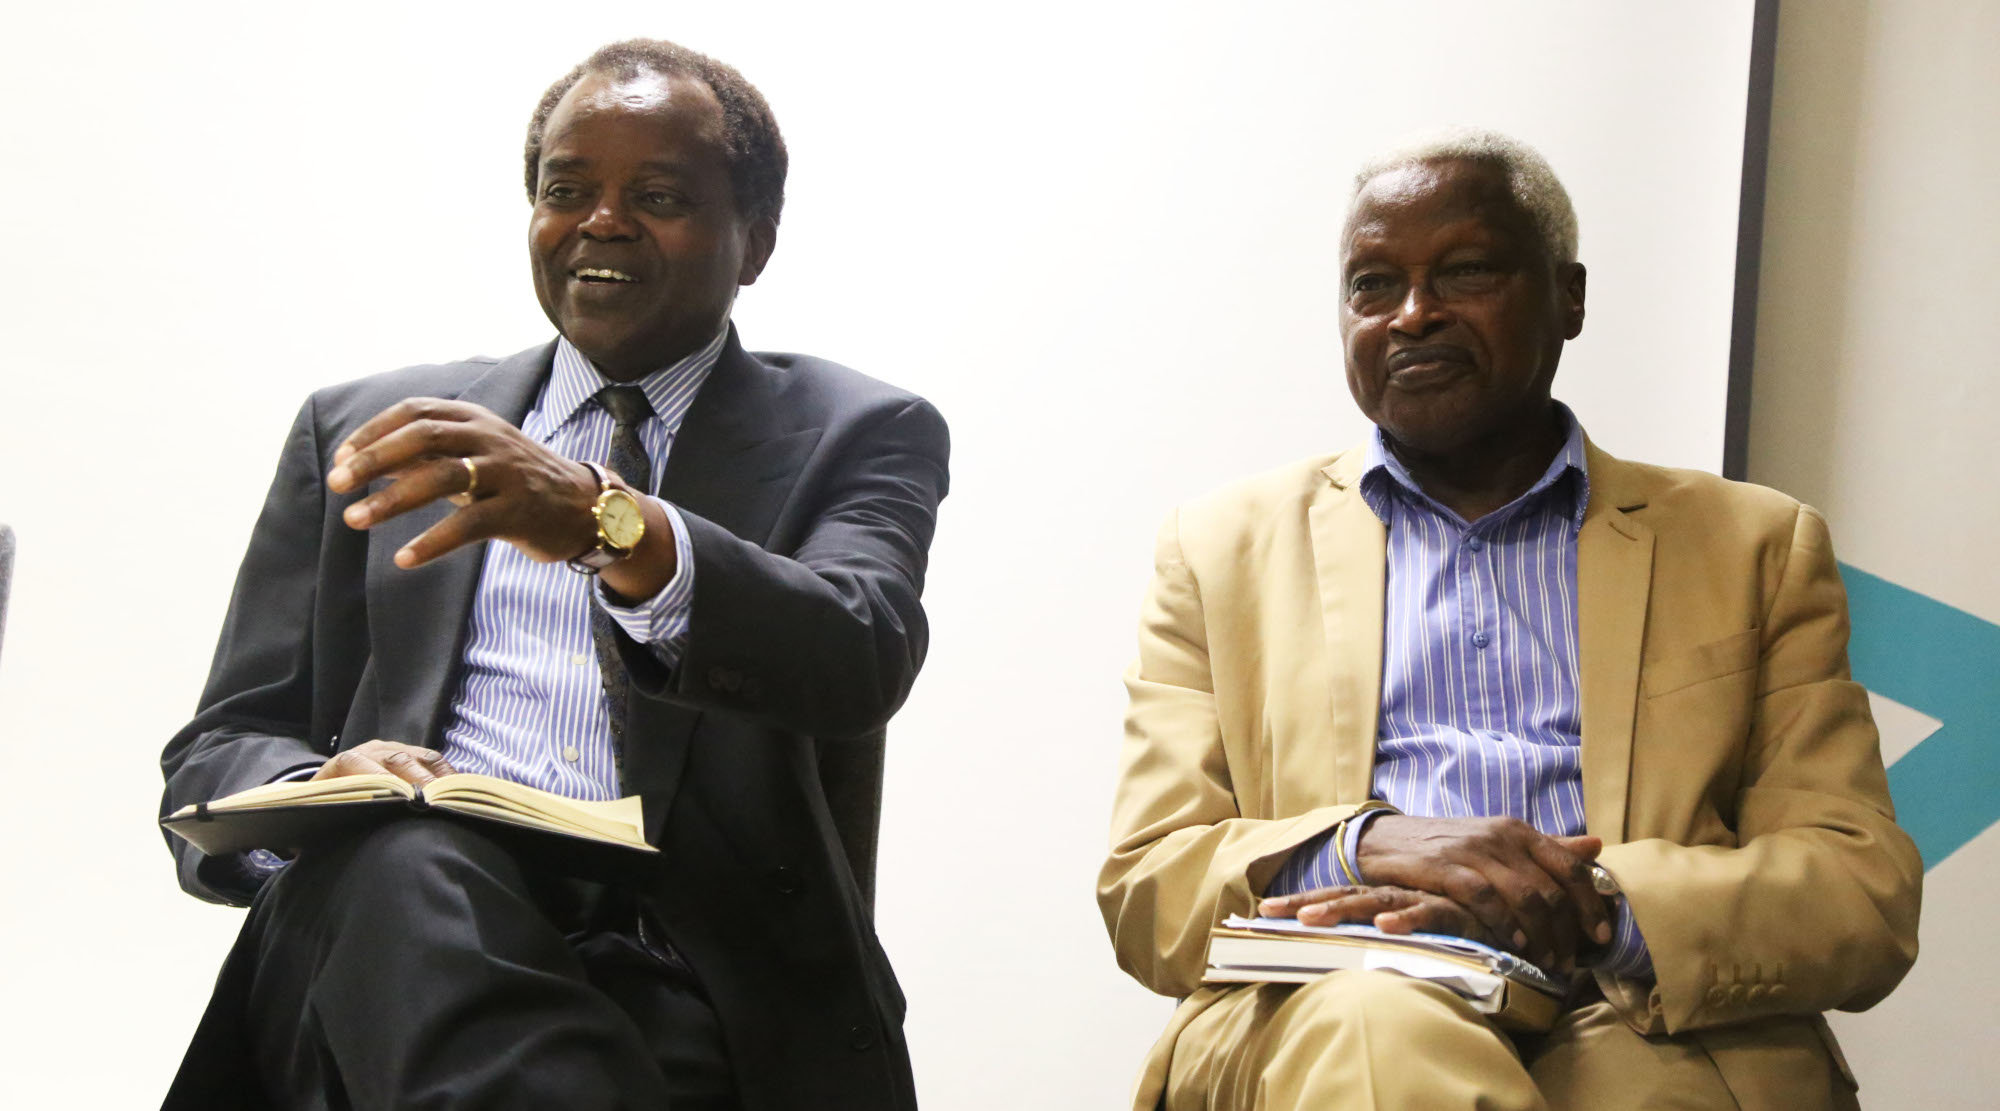 Prof Tharsisse Gatwa (L) and Prof Deogratius Mbonyinkebe during the official launch of the book in Kigali on Friday. / Sam Ngendahimana